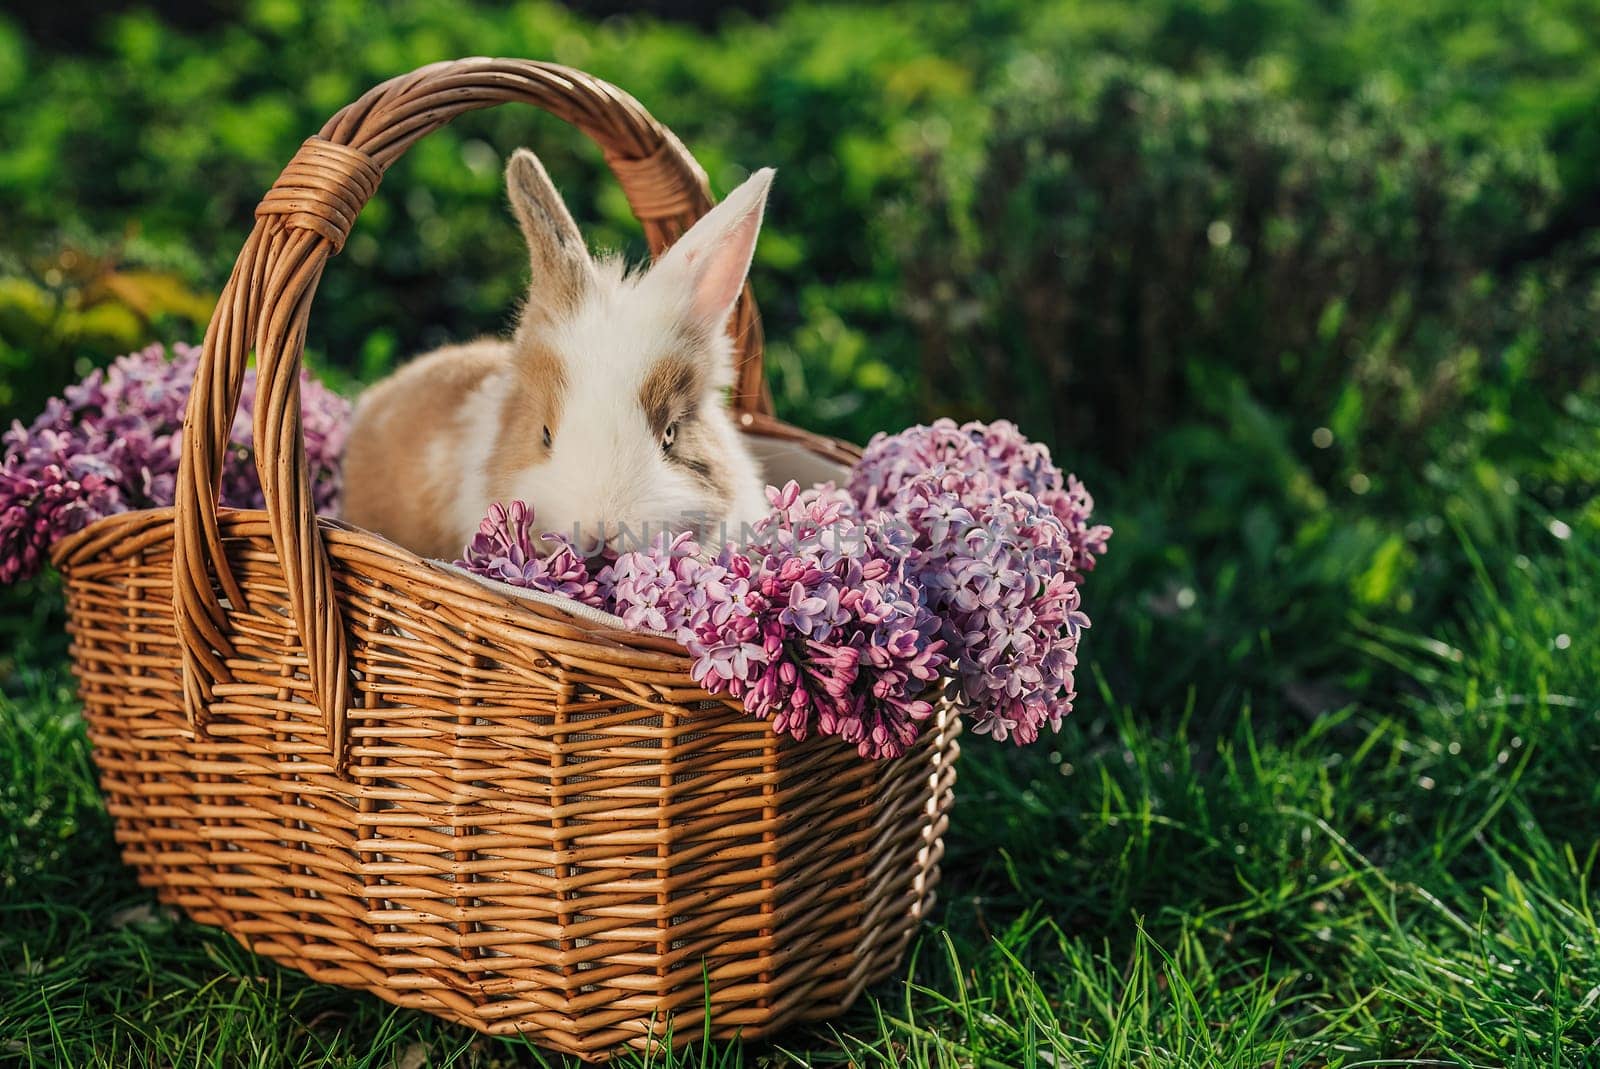 Cute little baby rabbit in wicker basket on nature background. Easter bunny symbol with lilac flowers bouquet. by kristina_kokhanova